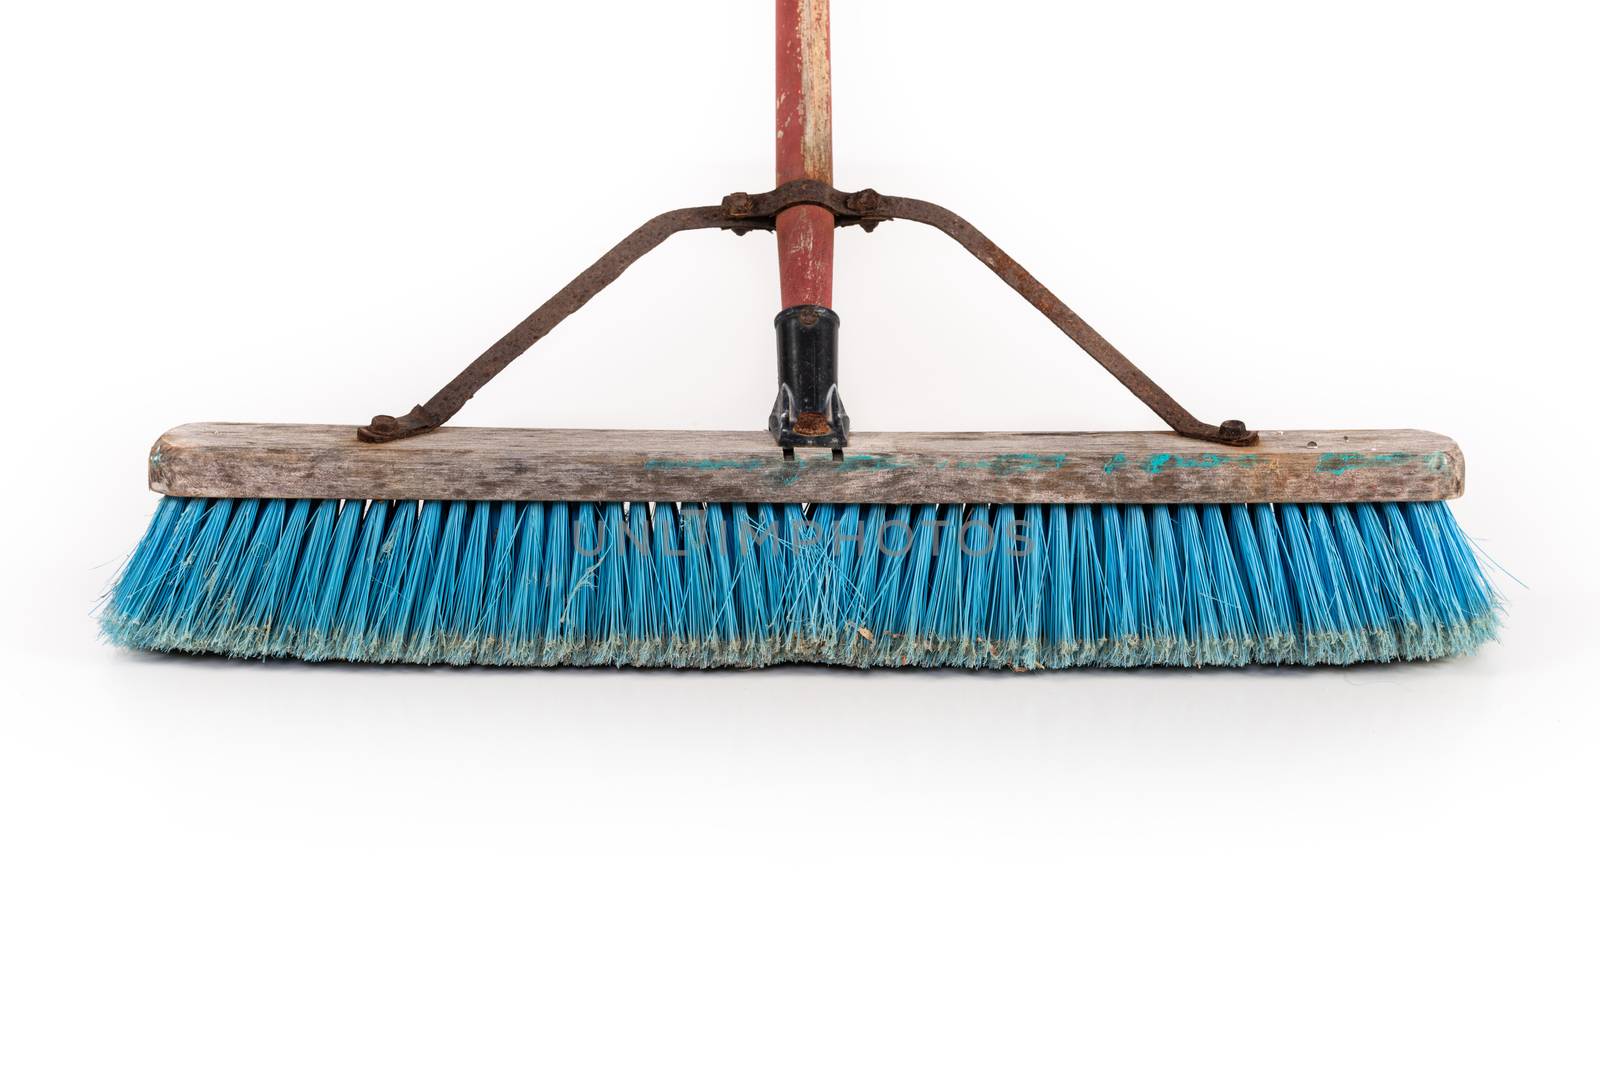 Dirty polypropylene push broom resting on a wall isolated on white.